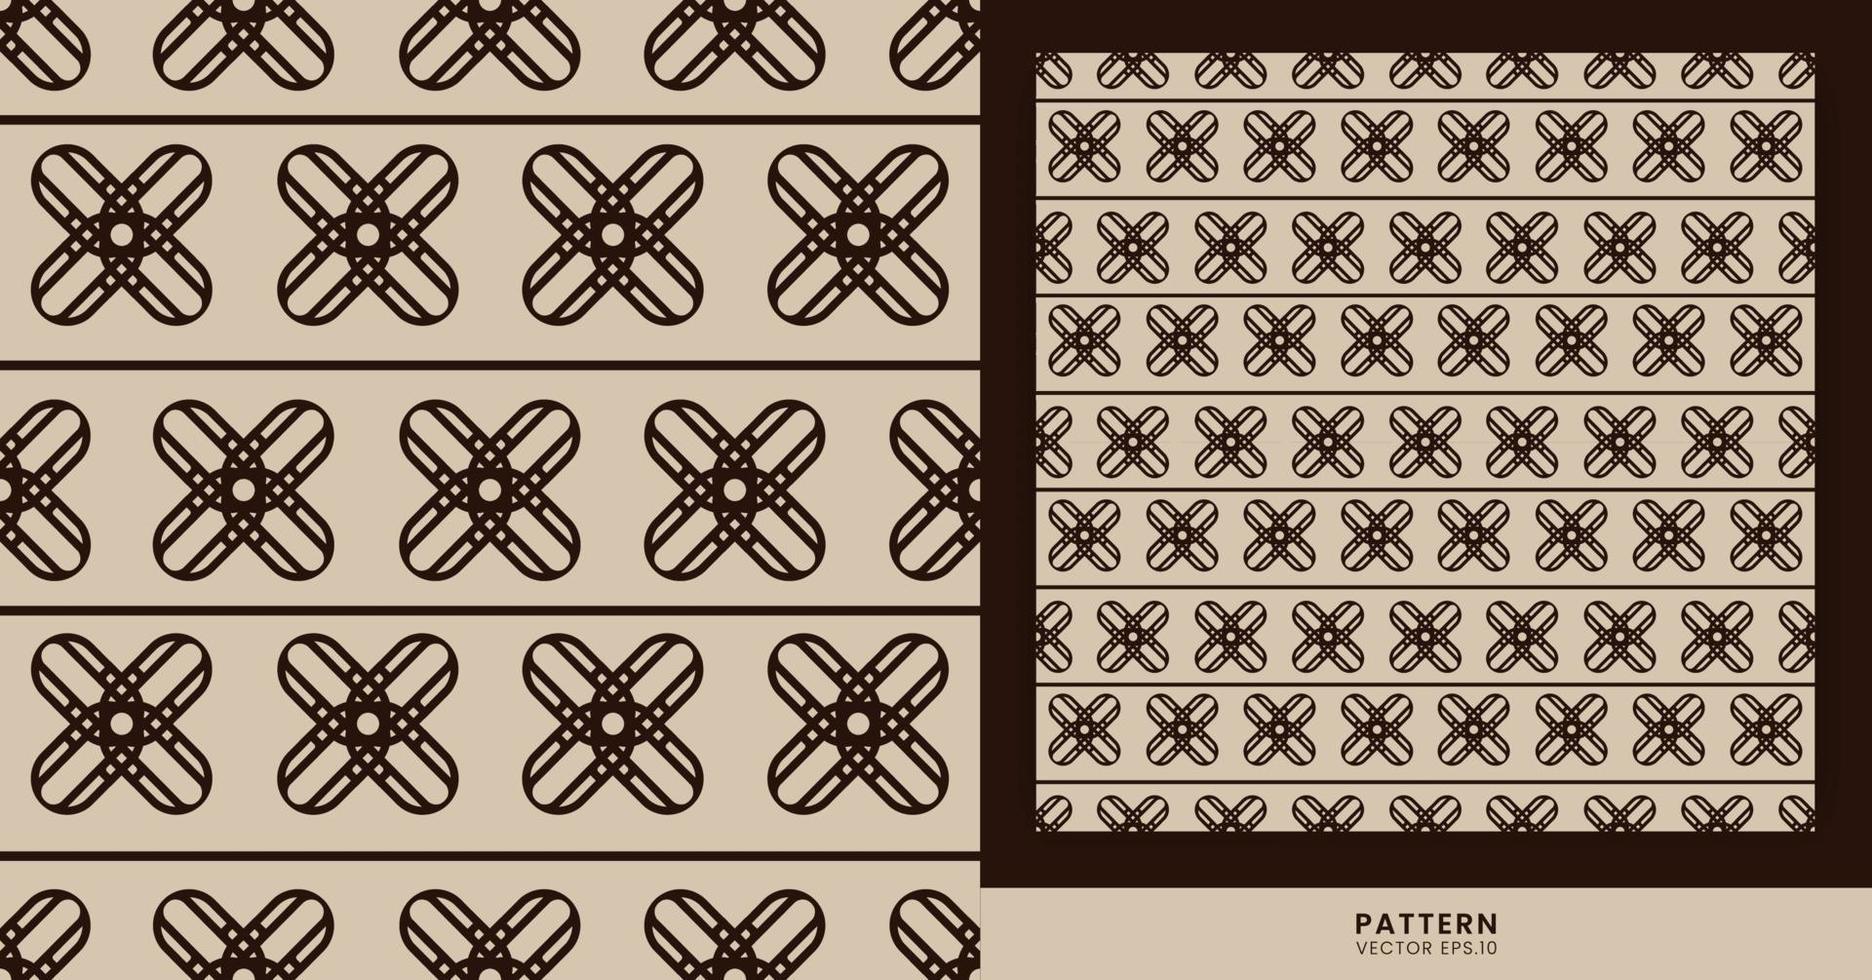 Patterns With Themes - brown stripe motifs with classic and ancient nuances on a brown background can be used to design clothes, books, gifts, or other designs. vector